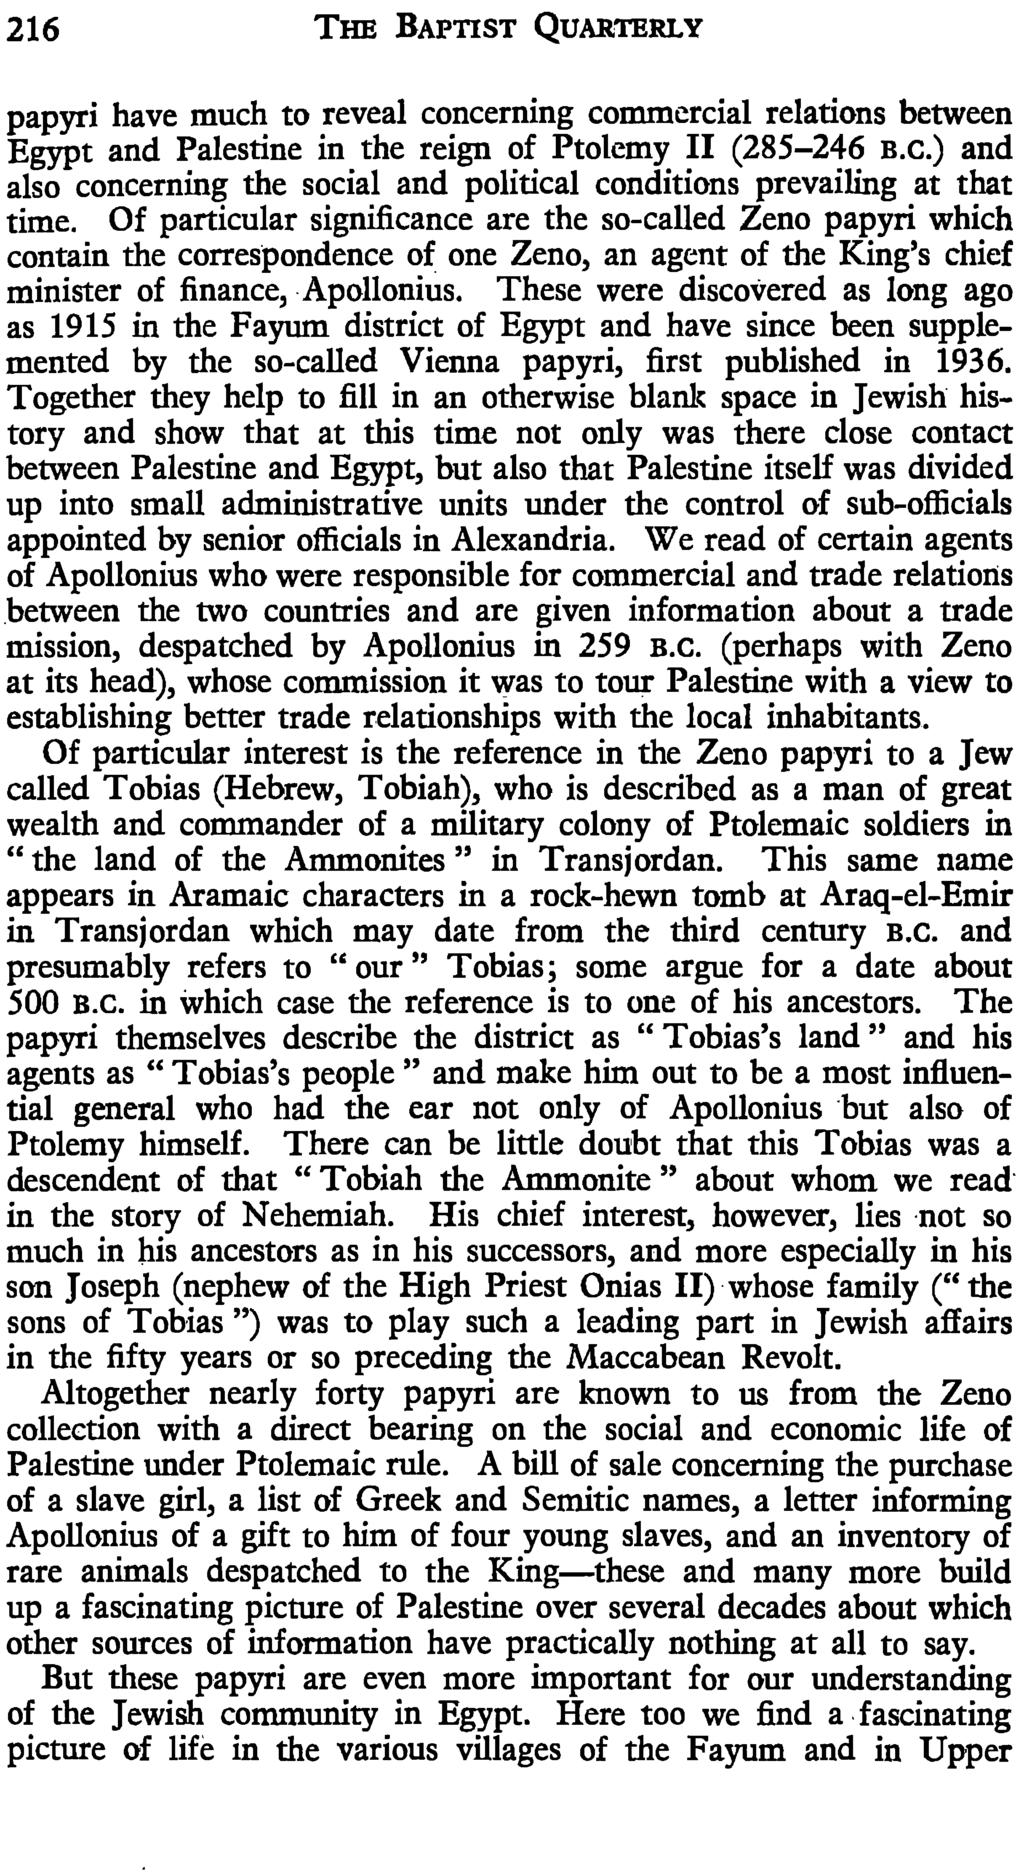 216 THE BAPTIST QUARTERLY papyri have much to reveal concerning commercial relations between Egypt and Palestine in the reign of Ptolemy 11 (285-246 B.C.